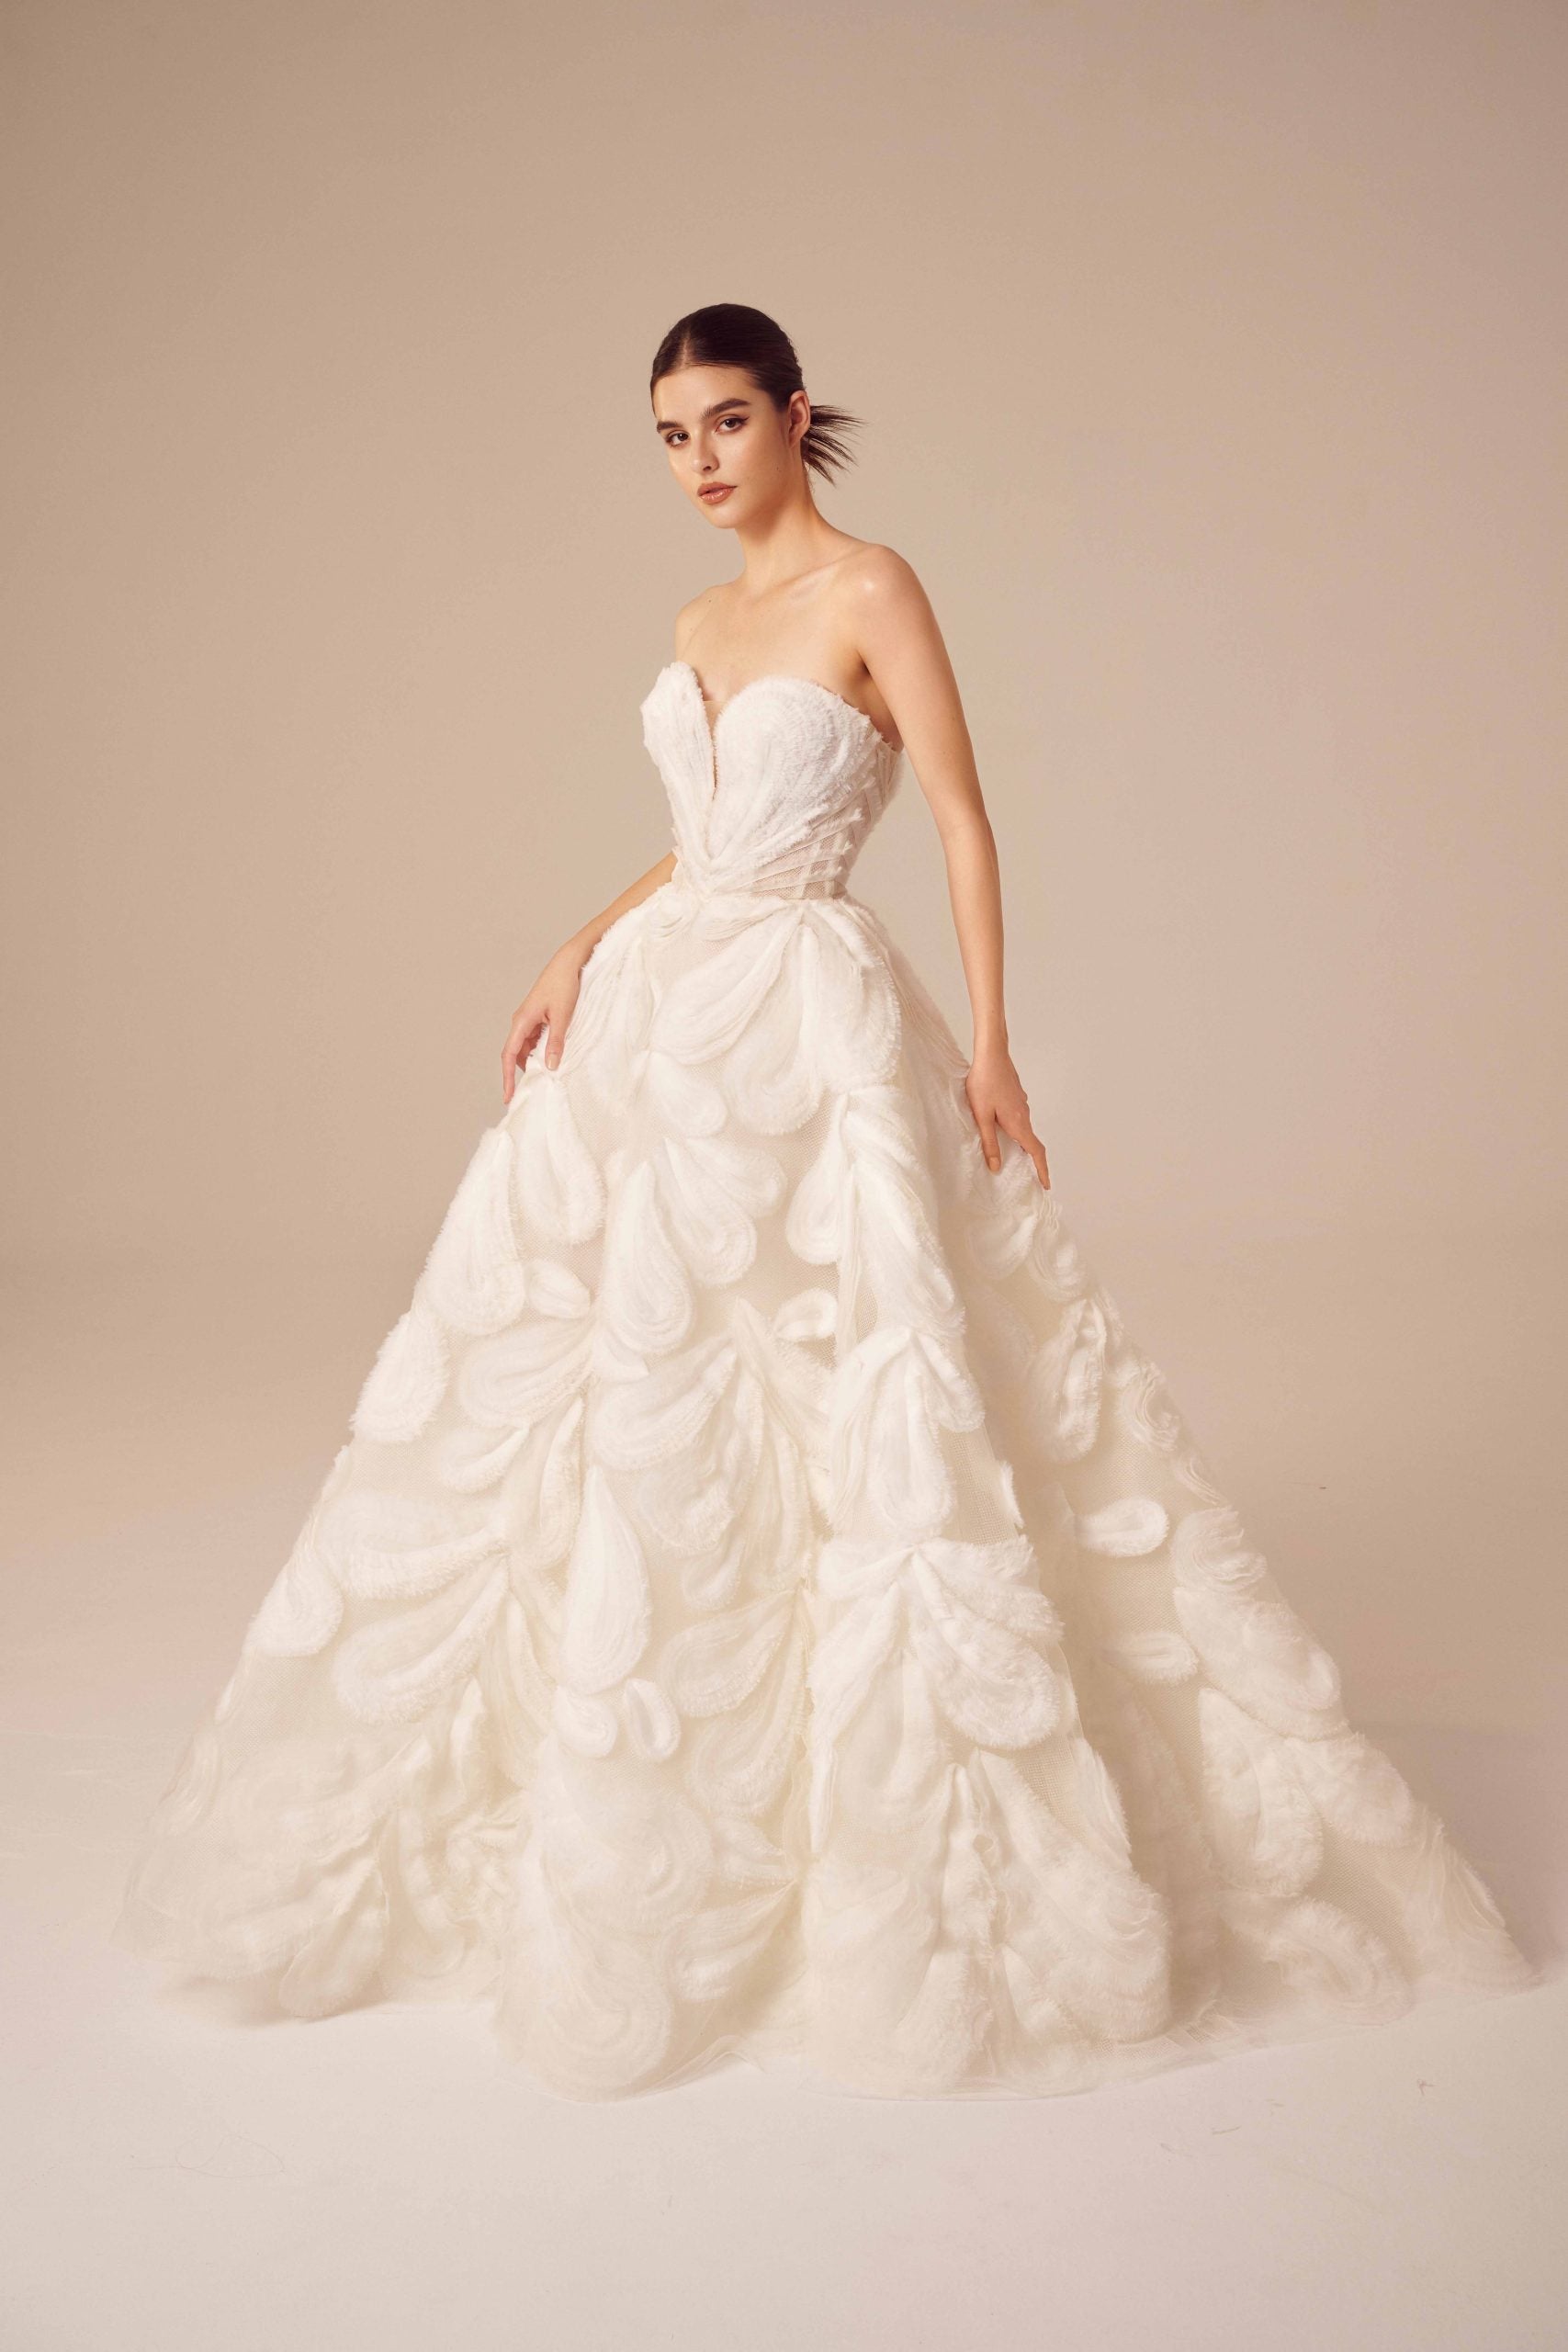 Strapless Textured Organza Ball Gown by Nicole + Felicia - Image 1